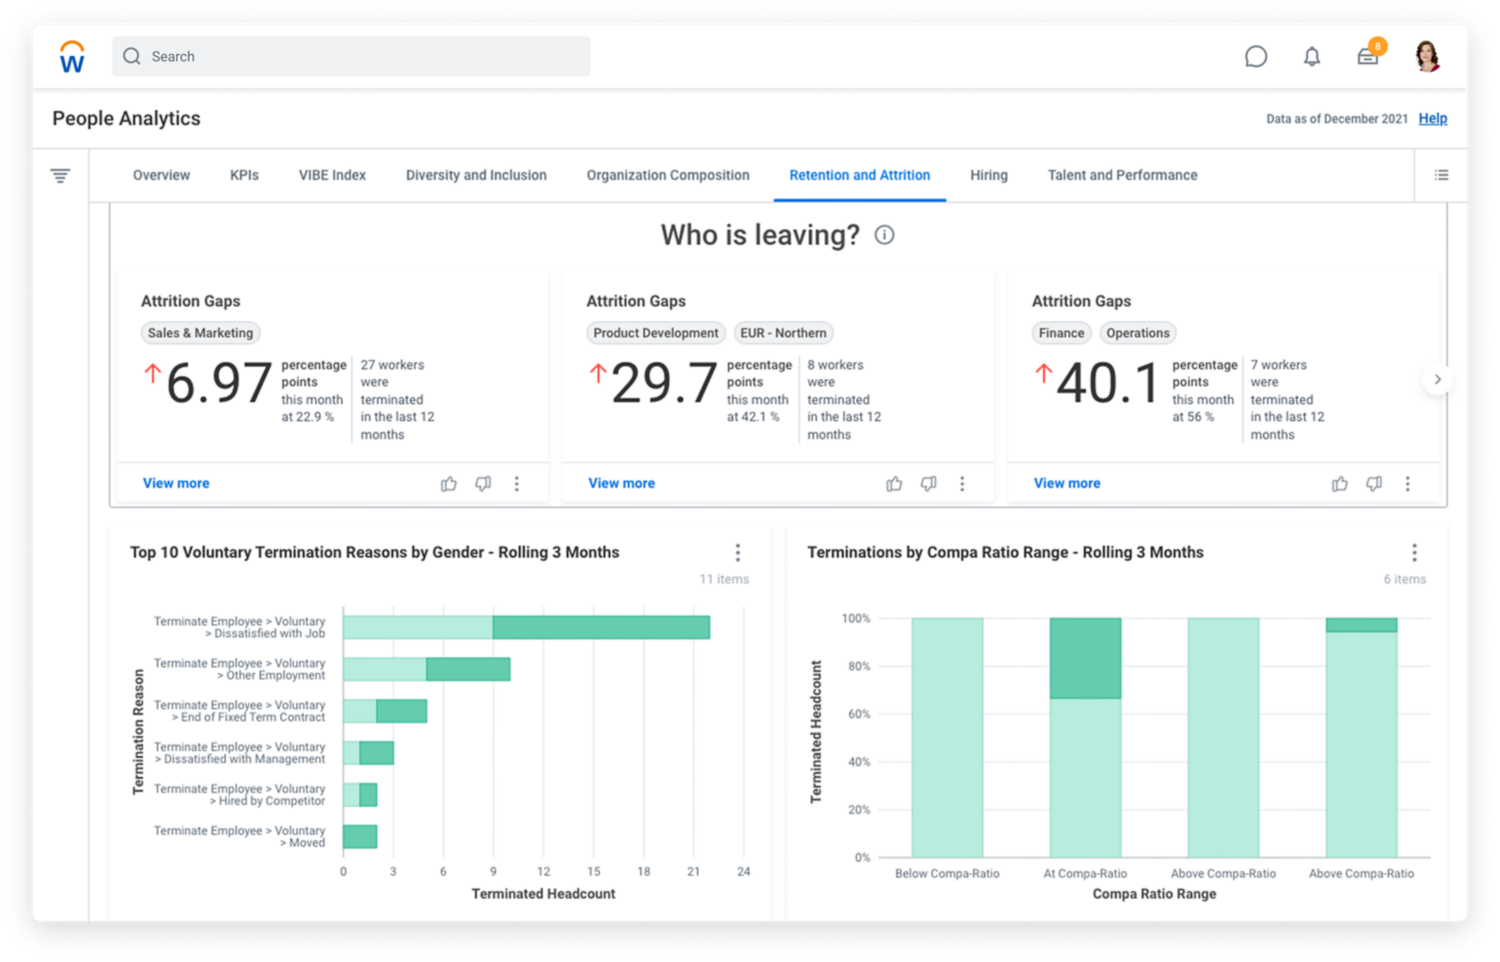 Workday People Analytics dashboard showing female diversity and inclusion trends and gaps.